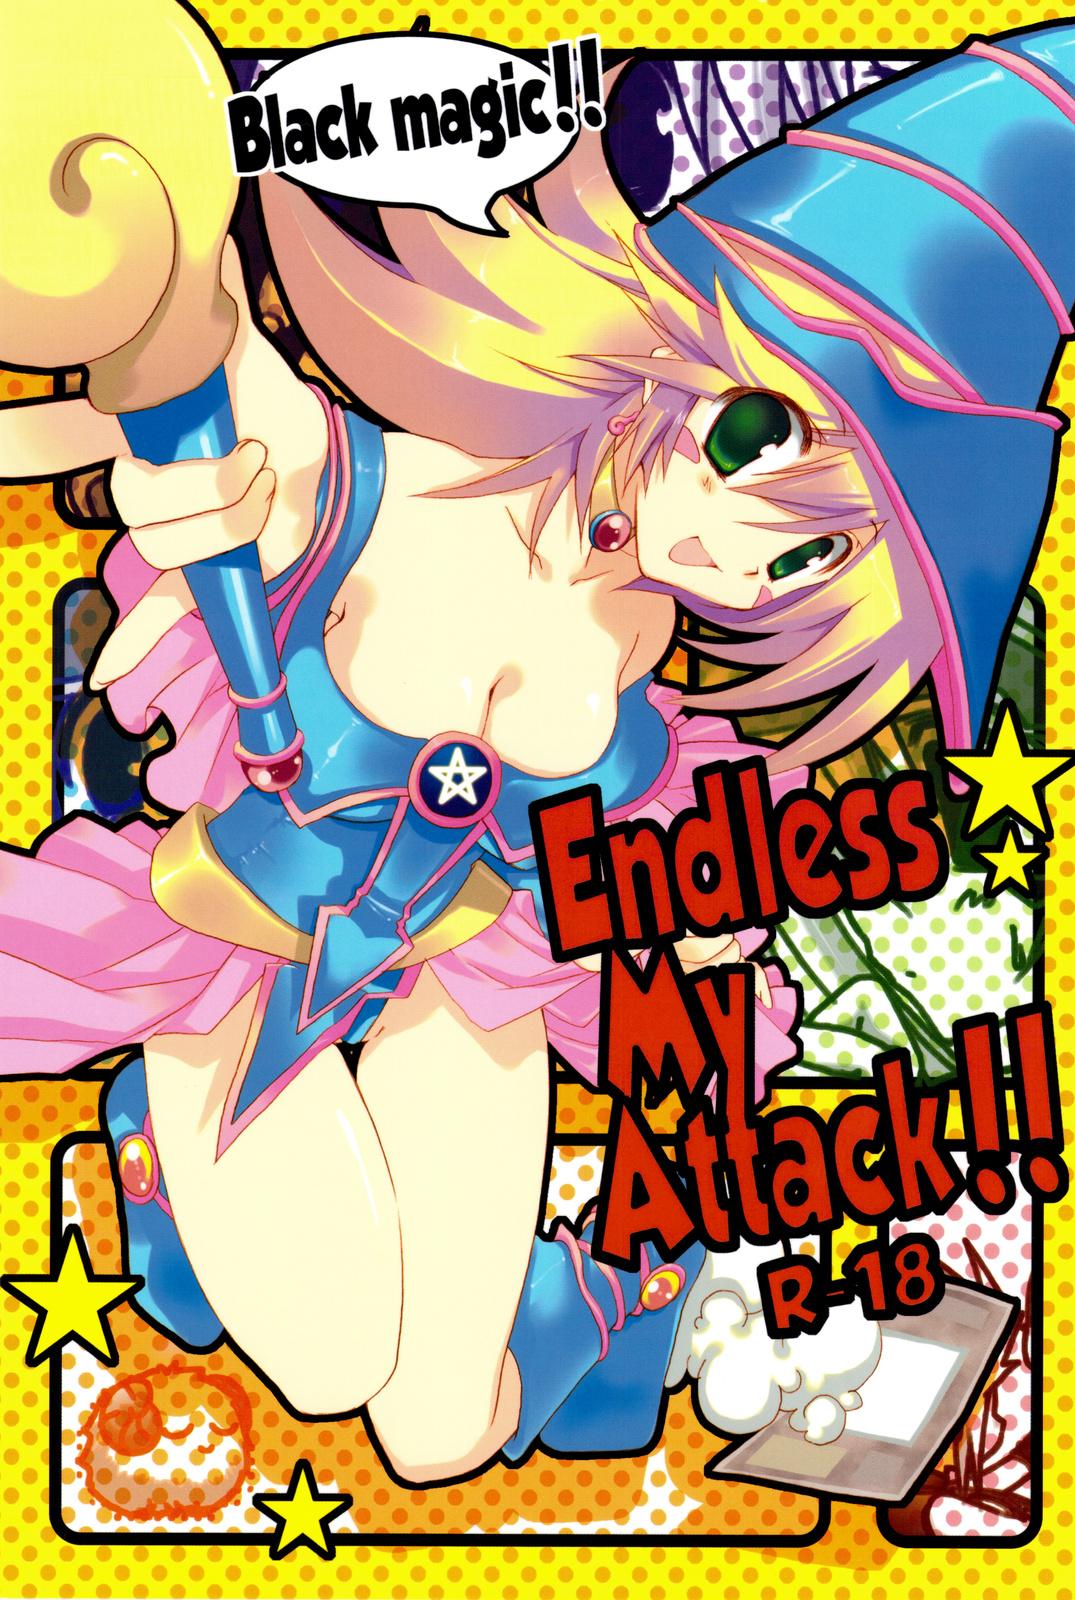 Oriental Endless My Attack!! - Yu-gi-oh Bubblebutt - Page 1